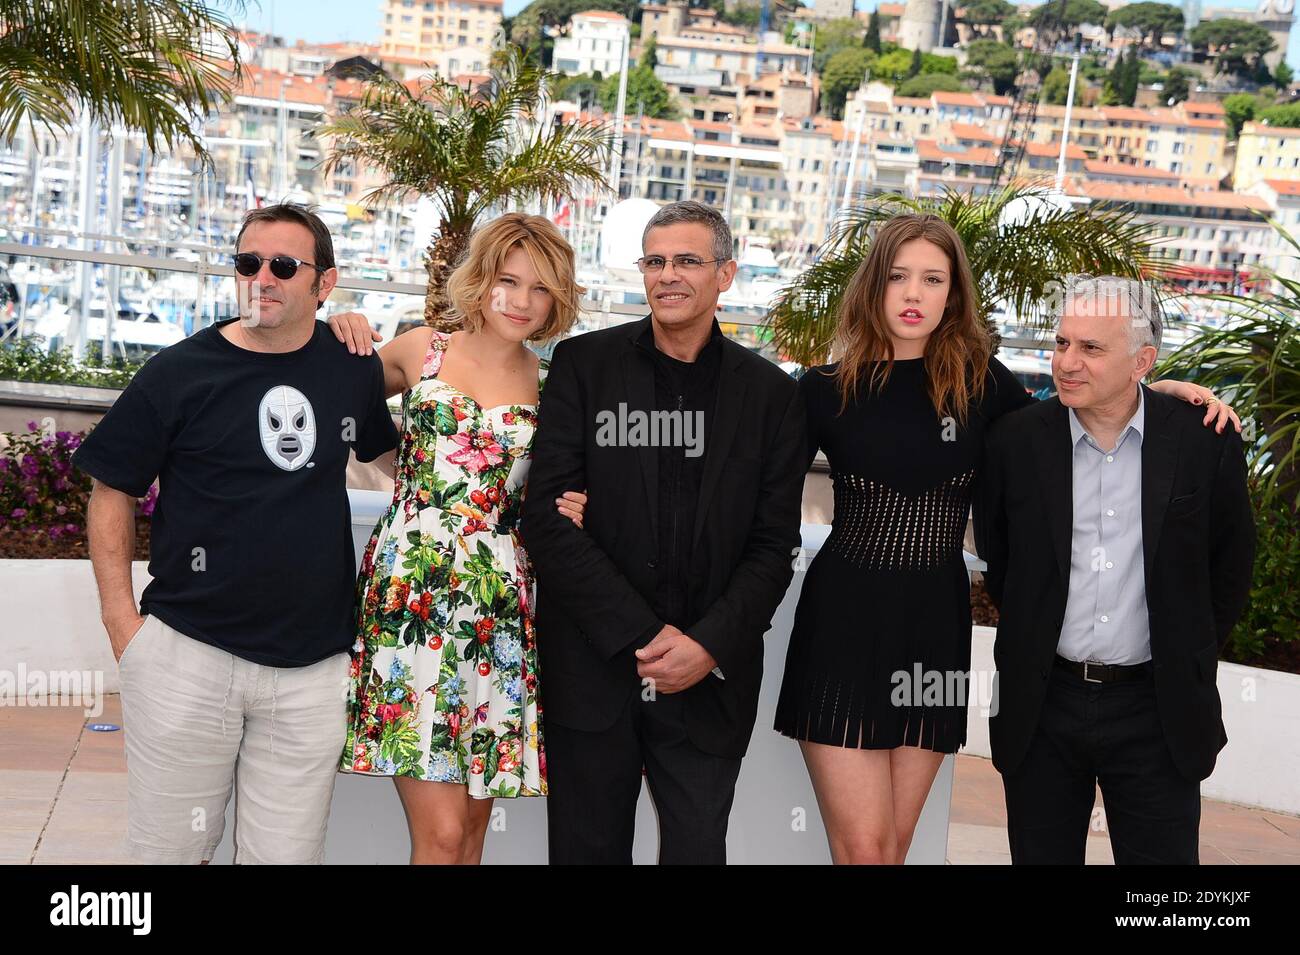 Director Abdellatif Kechiche, Lea Seydoux, Vincent Maraval, Adele Exarchopoulos, Brahim Chioua pose at the photocall for the film La Vie D'Adele held at the Palais Des Festivals as part of the 66th Cannes Film Festival in Cannes, France on May 23, 2013. Photo by Nicolas Briquet/ABACAPRESS.COM Stock Photo